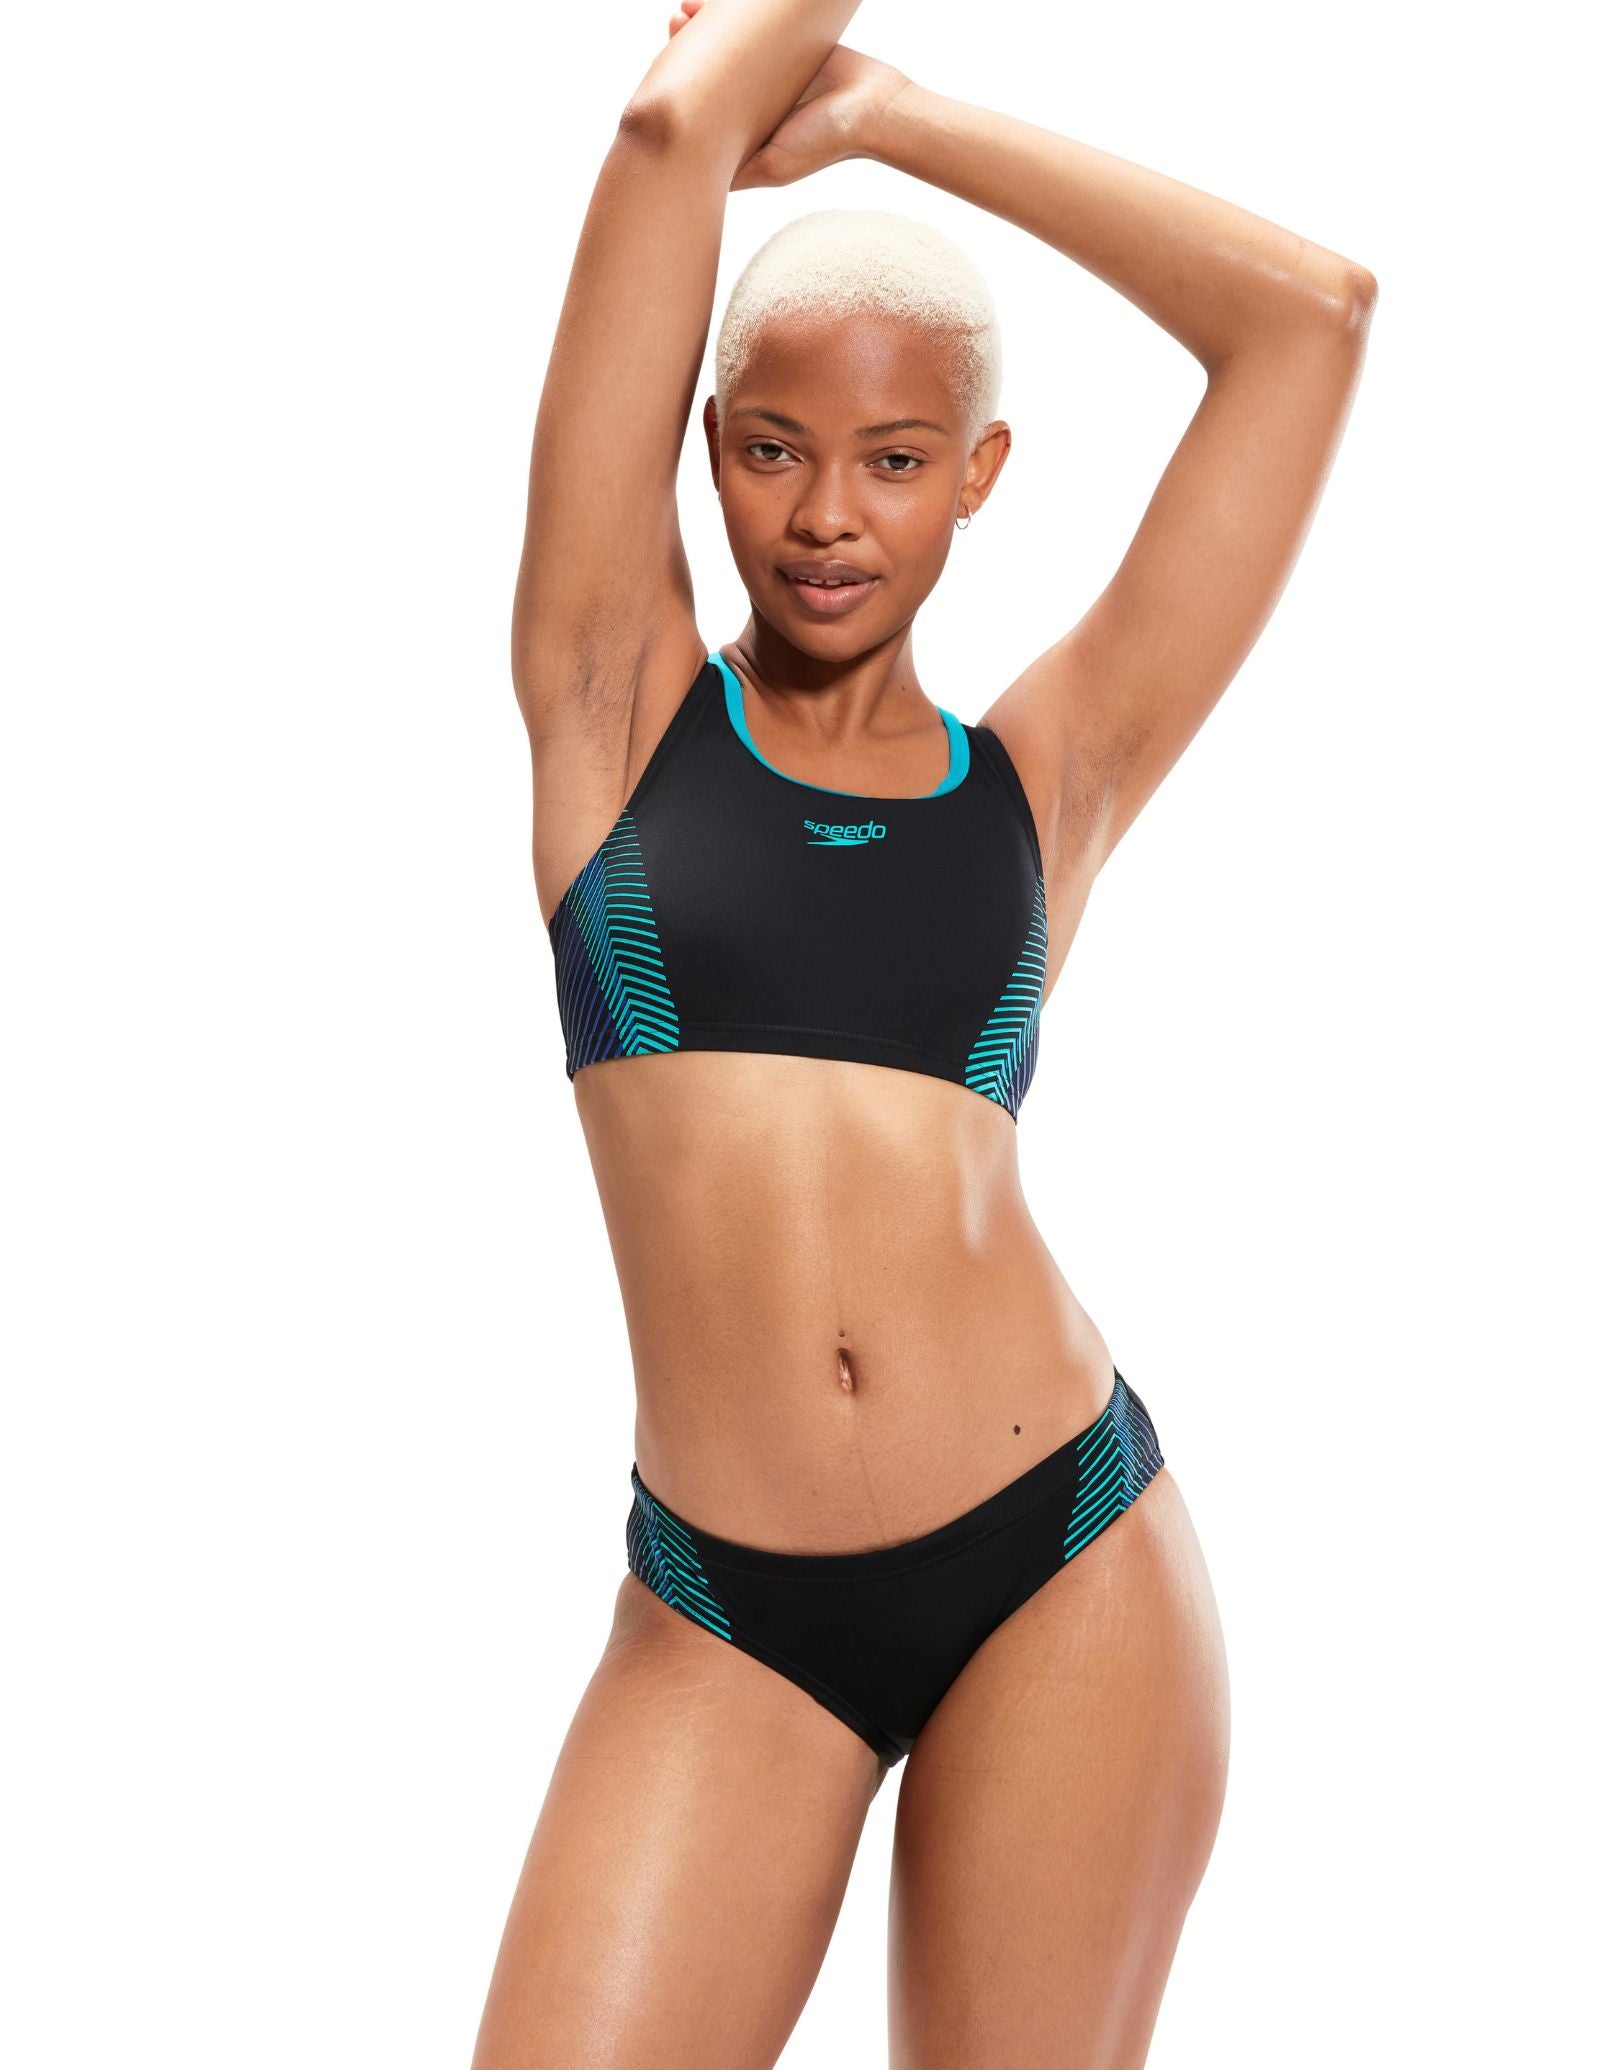 Black Women's Bikinis and Two-Piece Swimsuits For Women